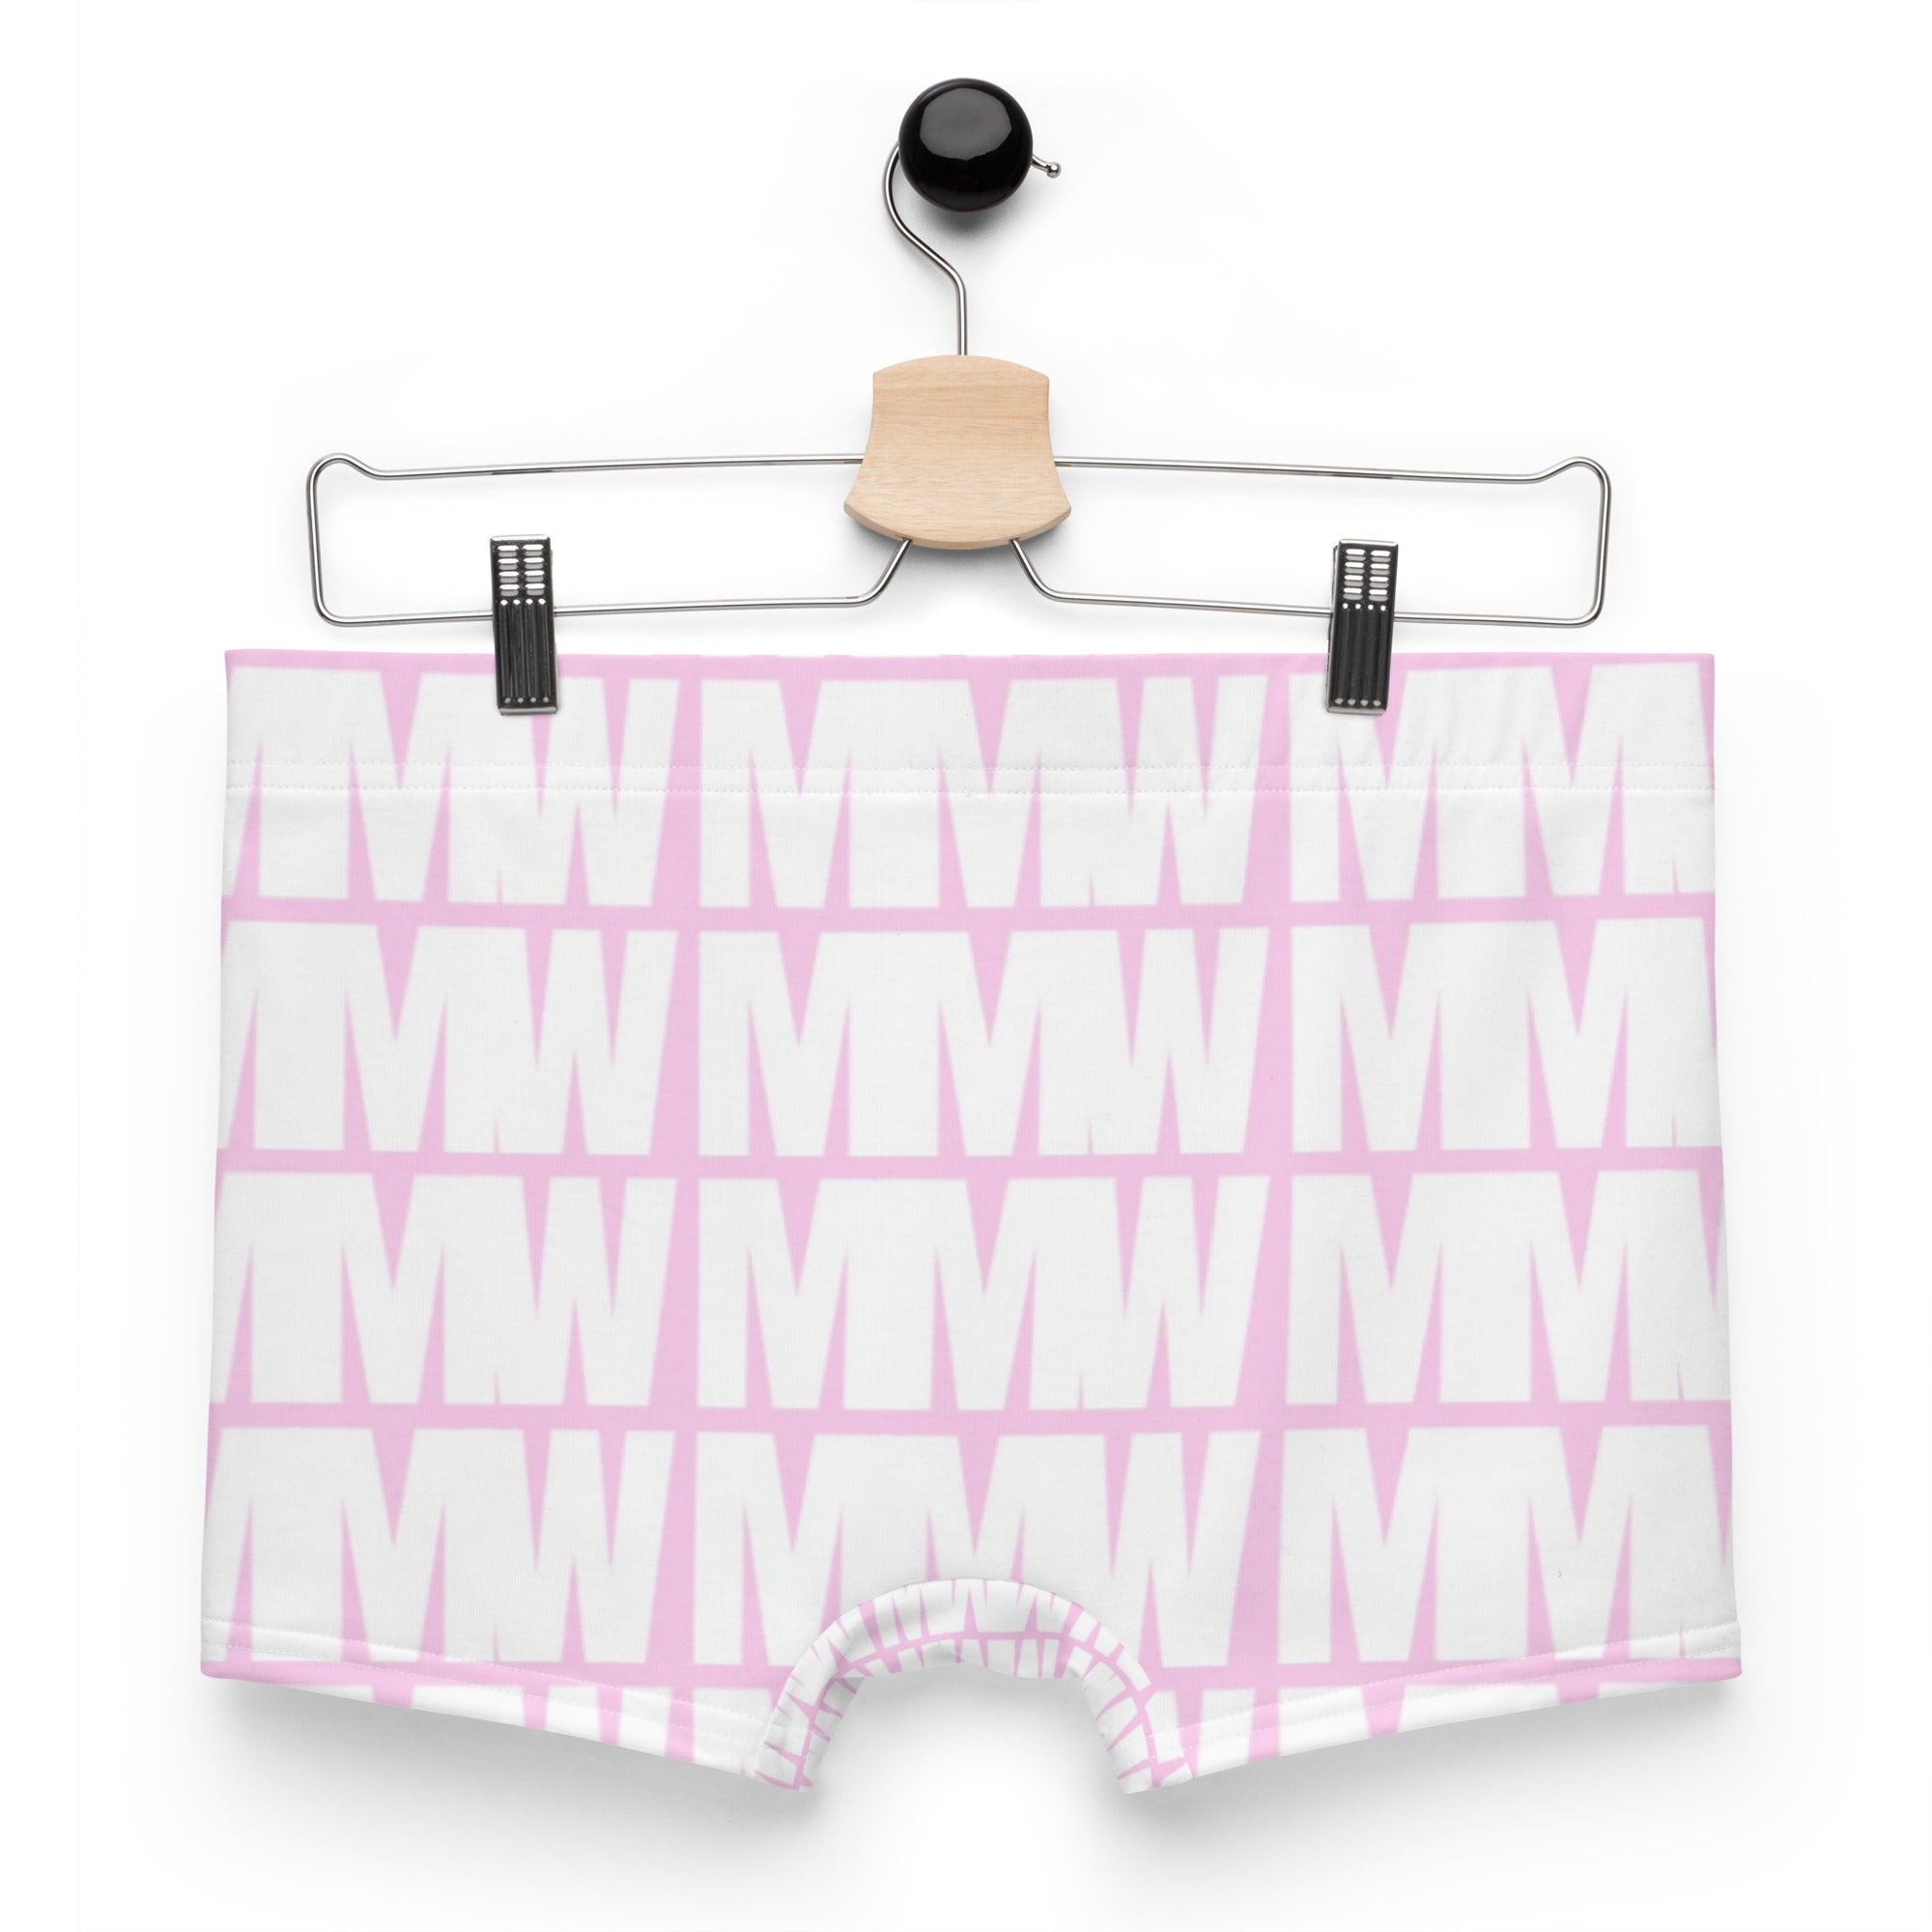 The MMW Legacy Boxer Briefs